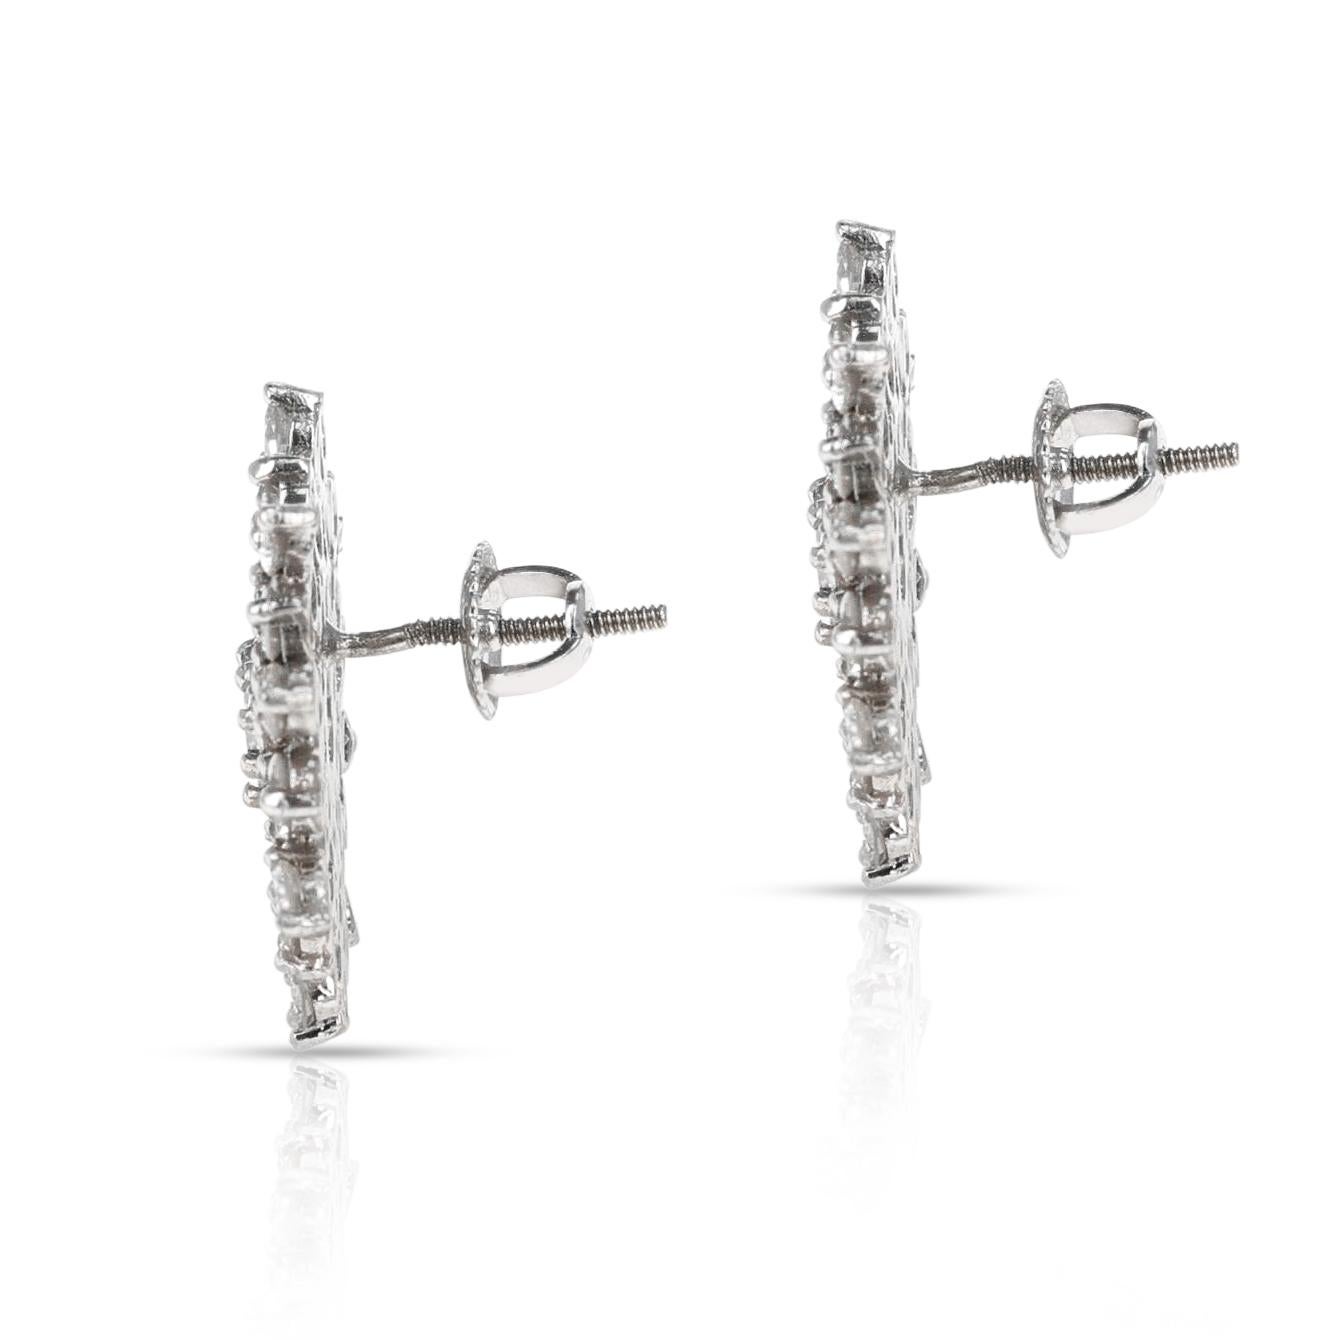 A stunning pair of Snowflake Floral Diamond Earrings made in 14k White Gold. The size of the earring is 0.90 inches. The weight of the earring is 7 grams. 
